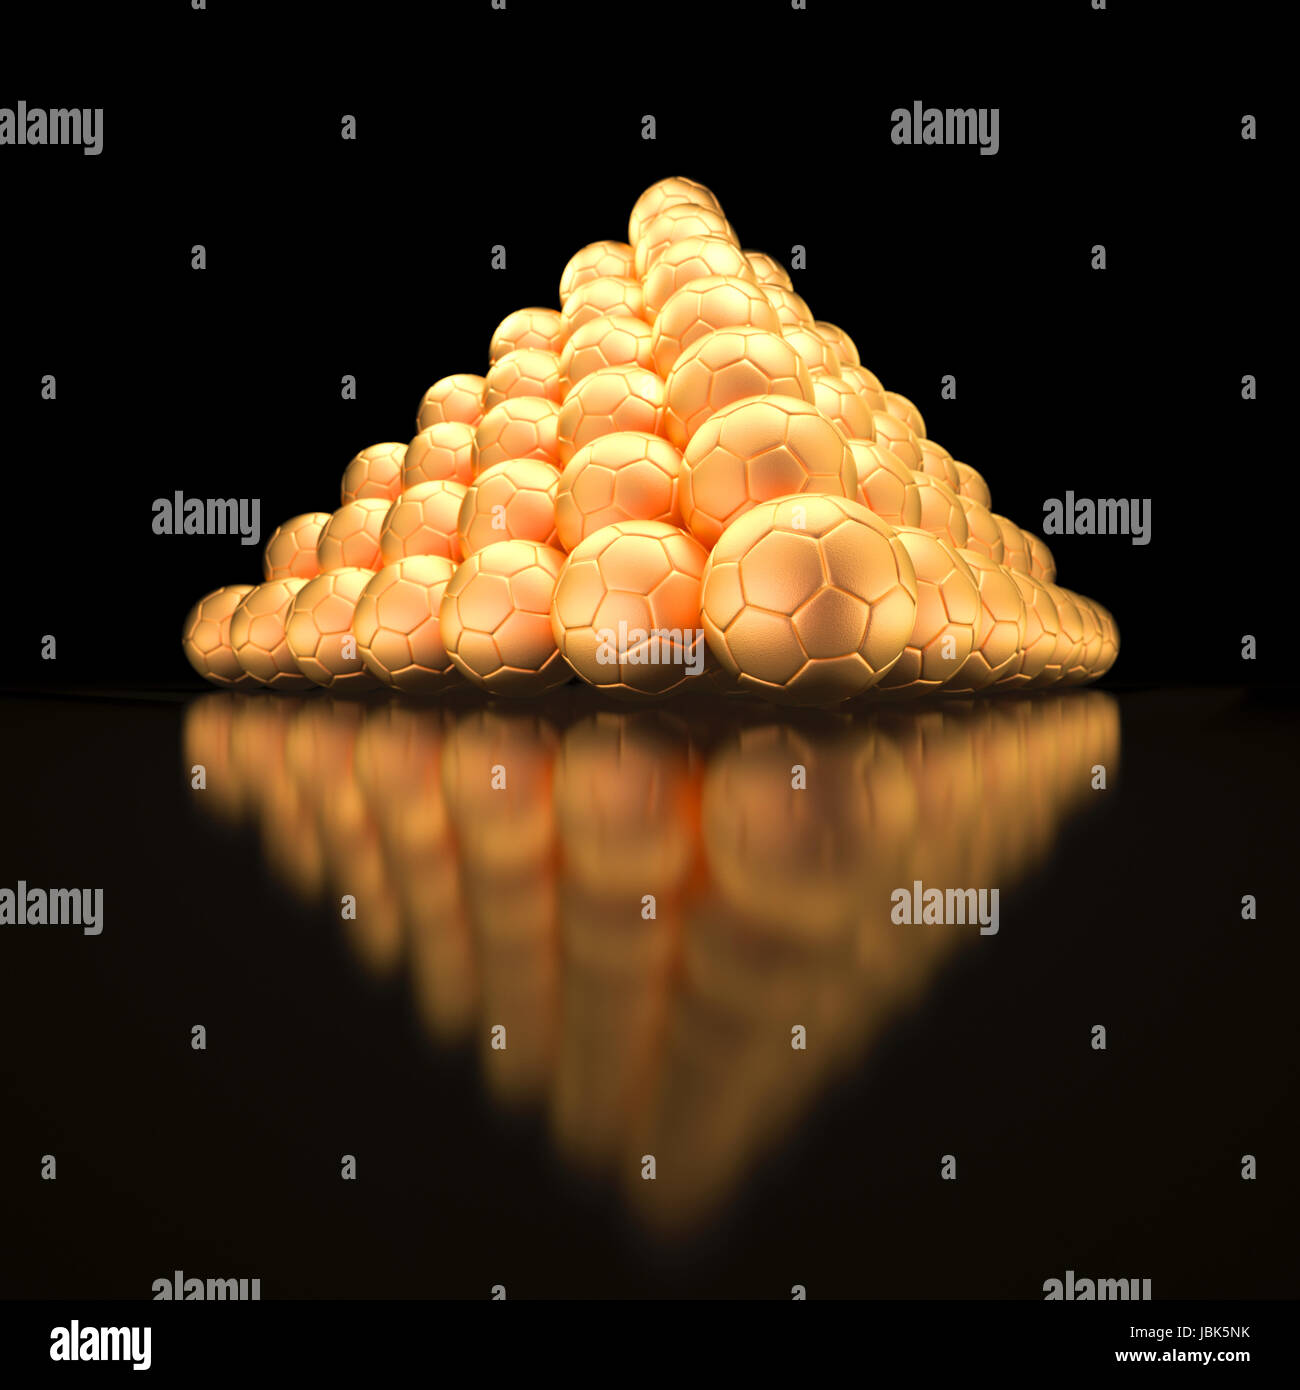 Pyramid made out of golden soccer balls on black background and black floor with strong reflections symbol for success and triumph Stock Photo